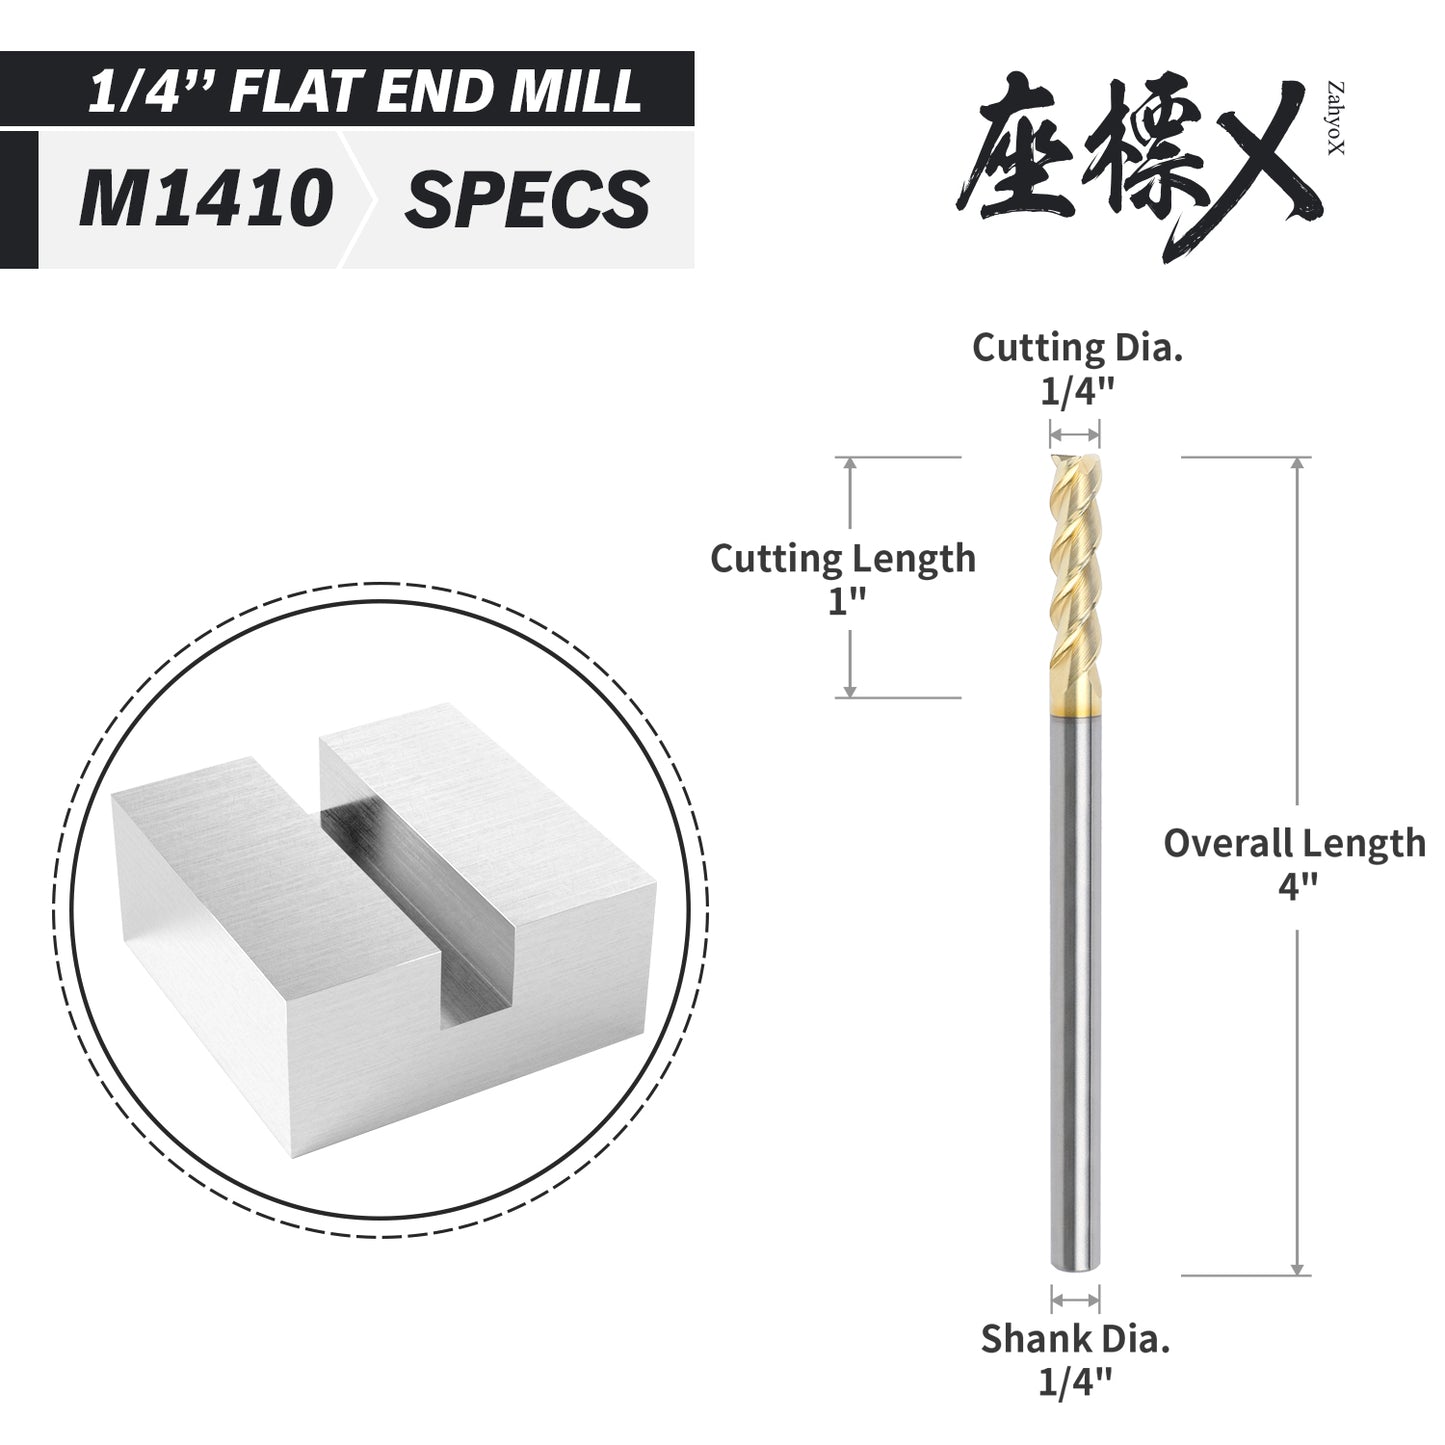 M1410 ZrN Coated Upcut Square Nose End Mill for Aluminum - 3 Flutes - 1/4 SD - 1/4 CD - 1 CL - 4 OL